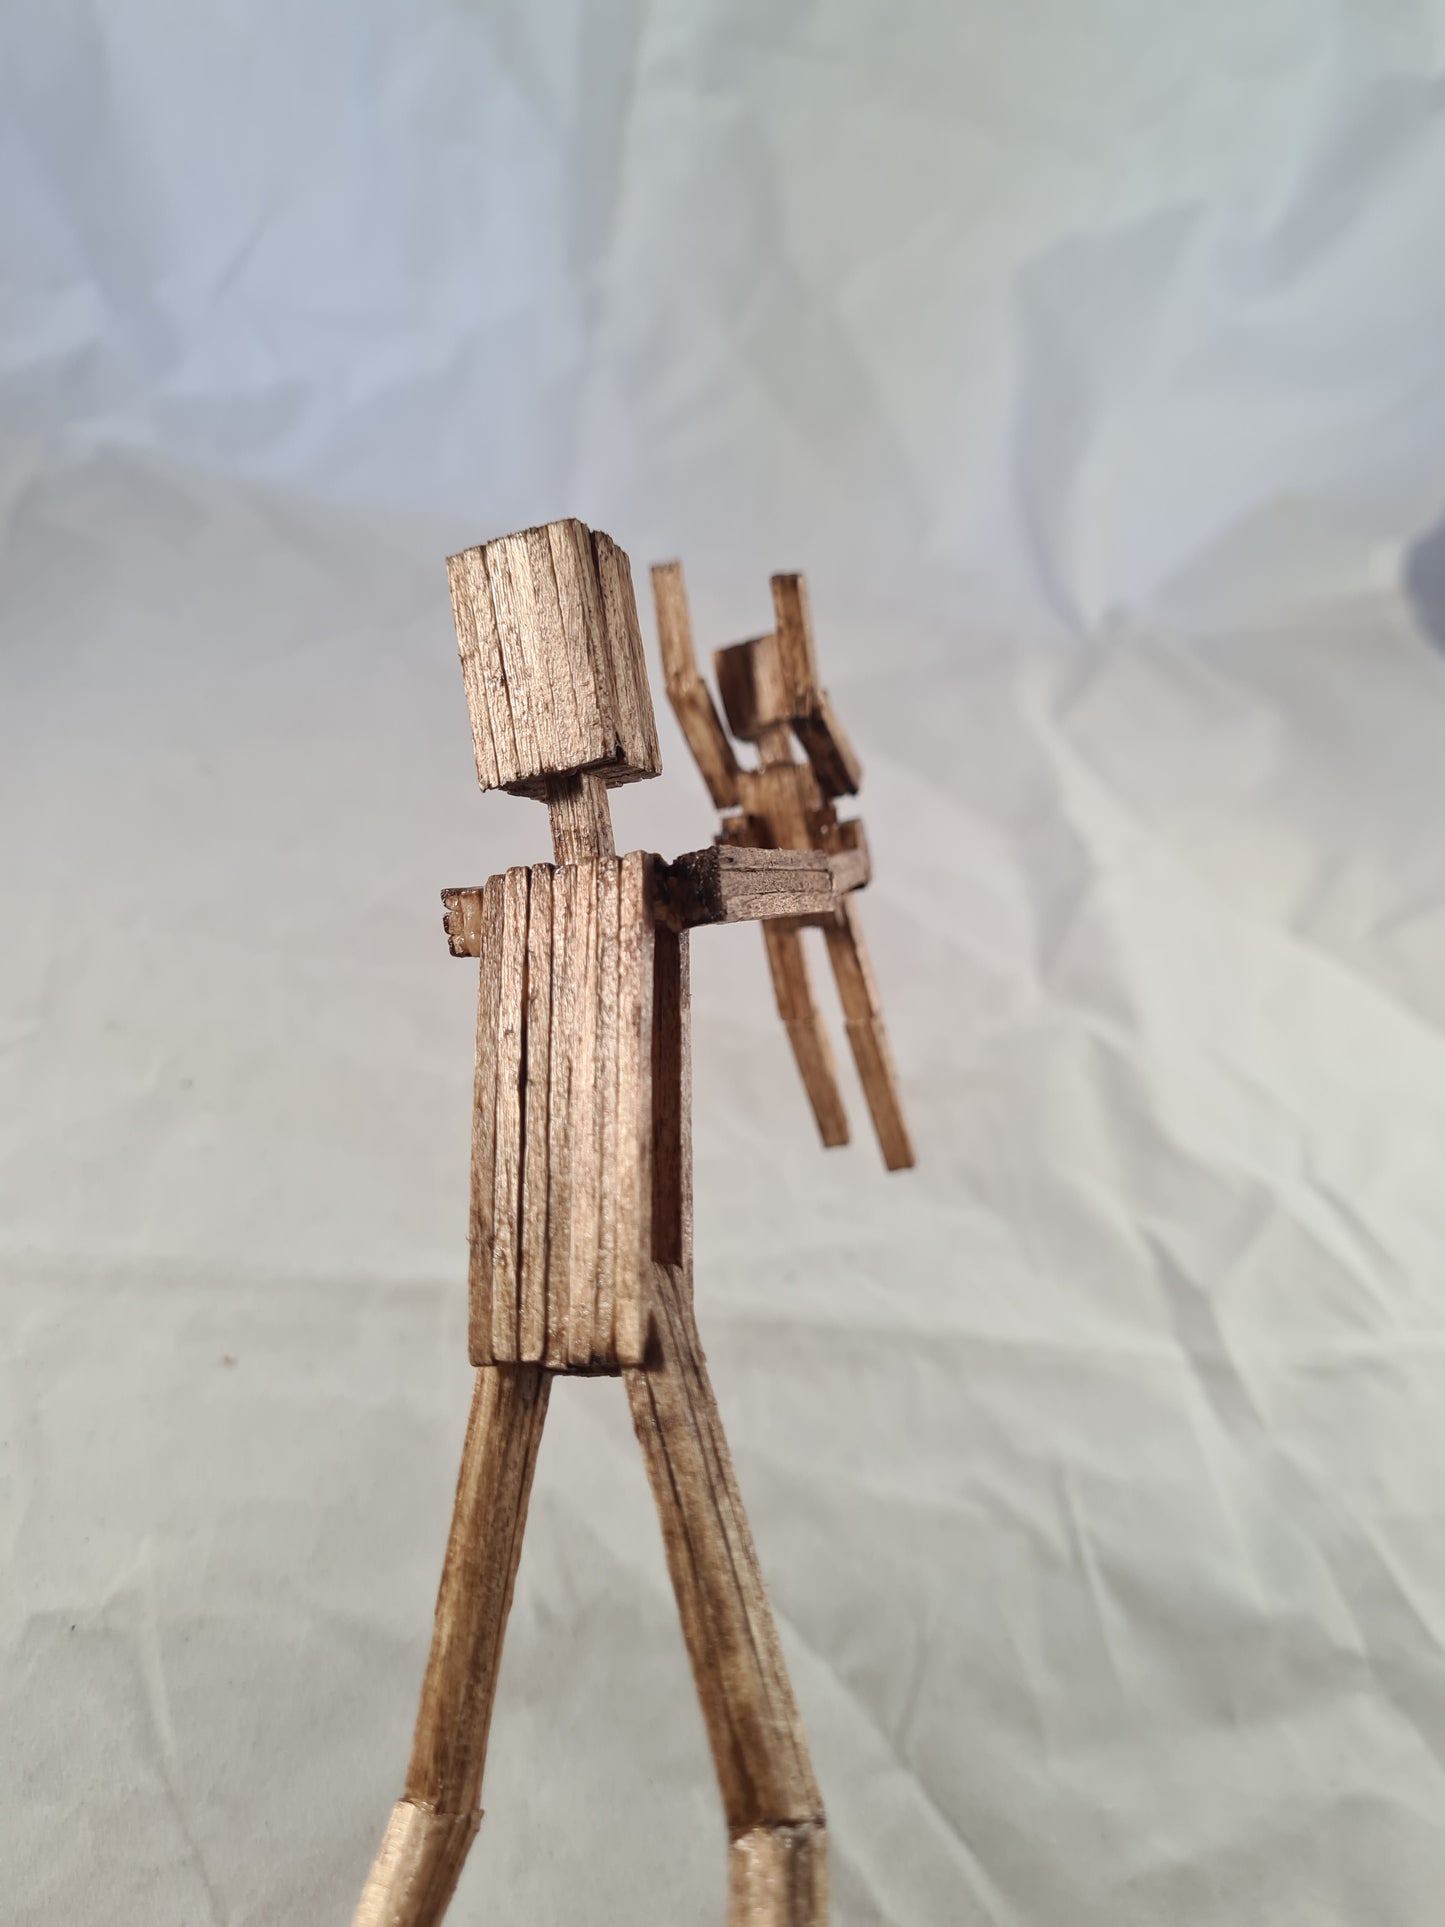 Flying Kid - Handcrafted Wooden Matchstick Figures - Gifts, Ornaments and Decor By Tiggidy Designs